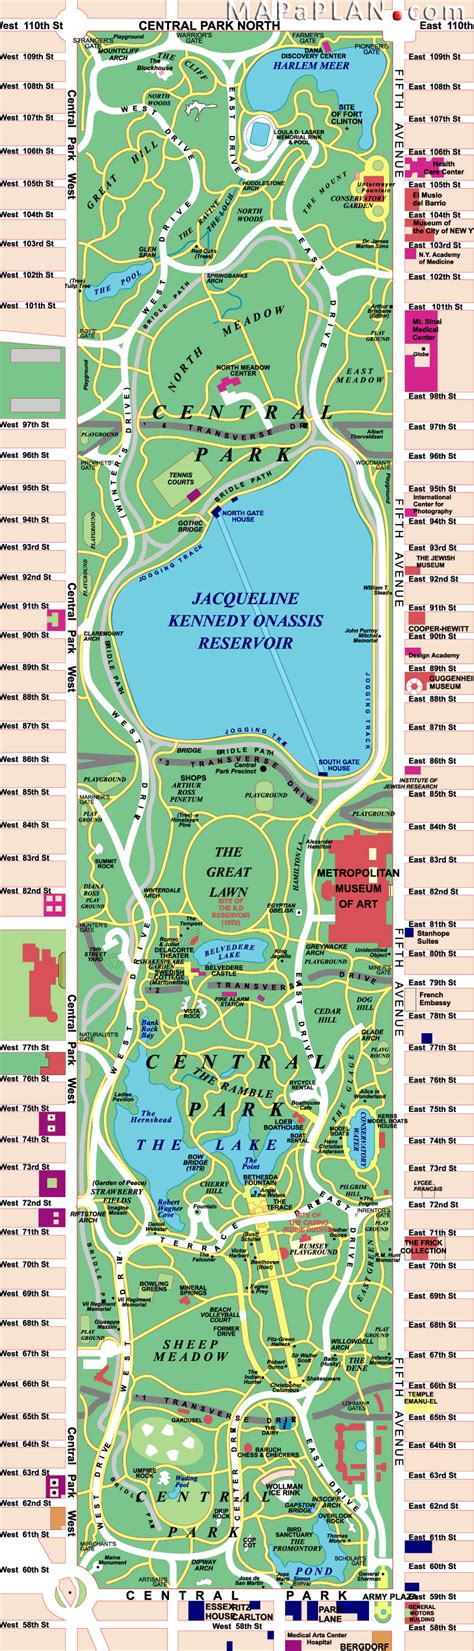 Central Park Favourite And Free Destination Spots New York Map